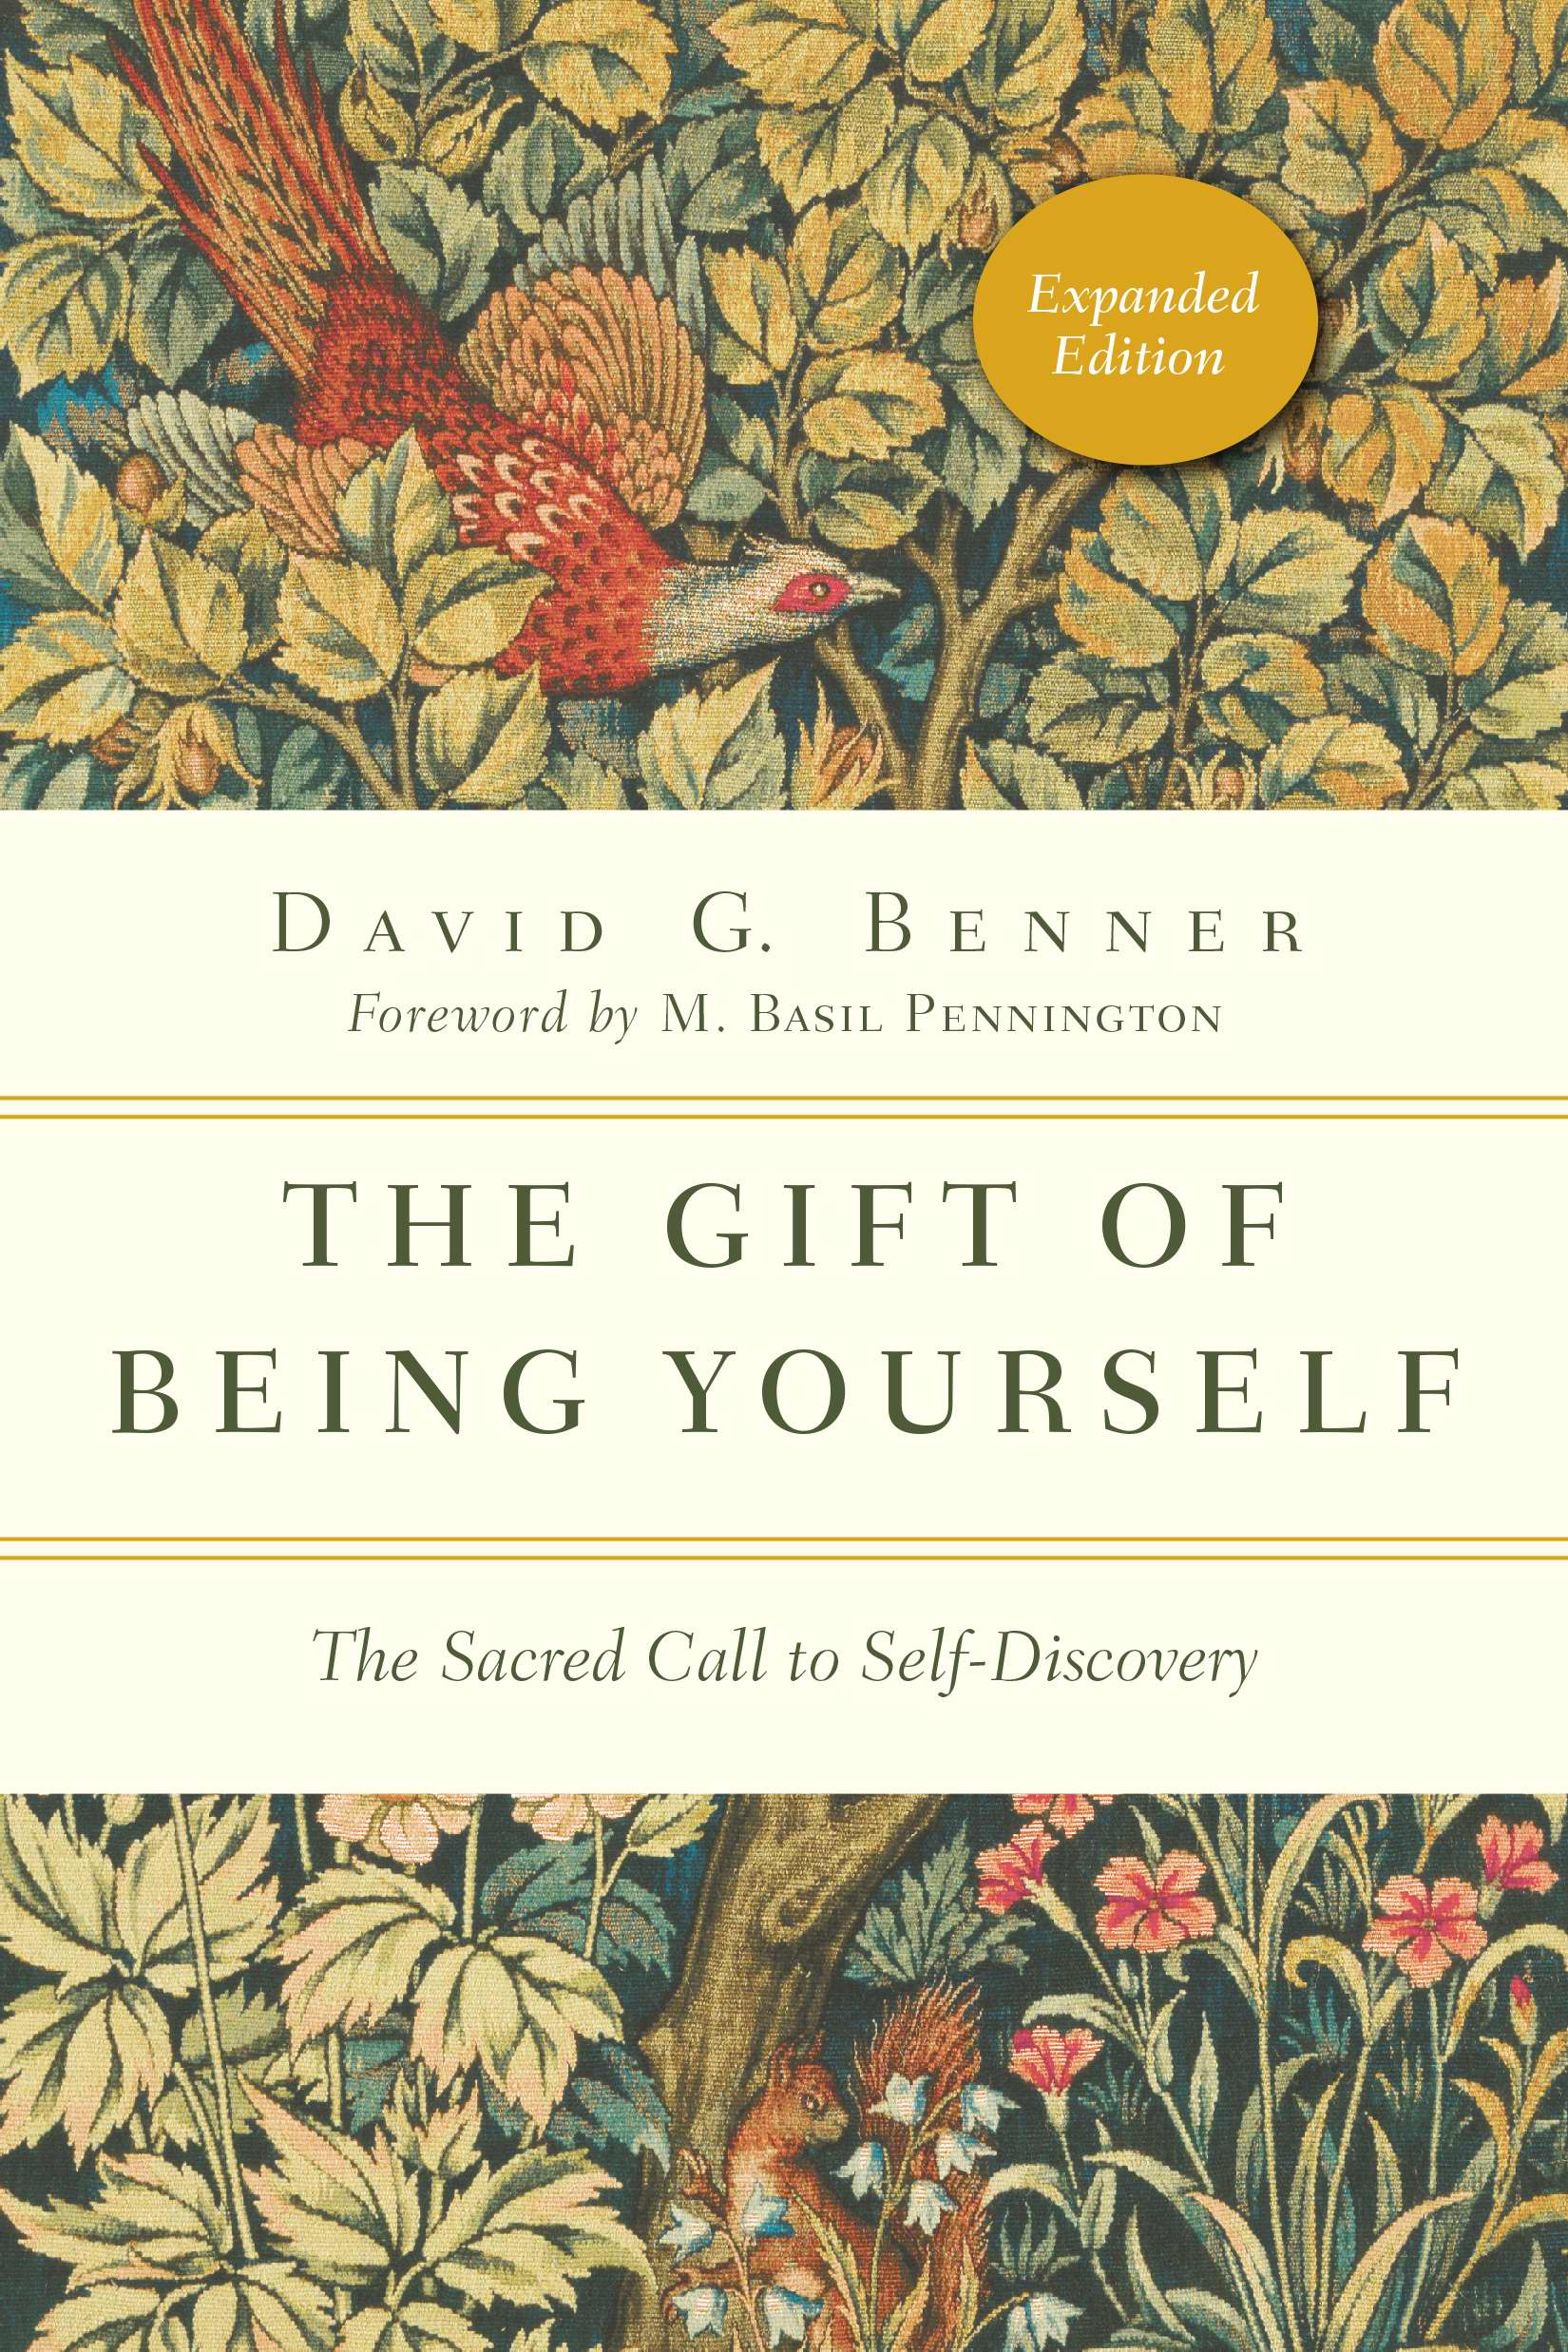 Image of The Gift of Being Yourself other